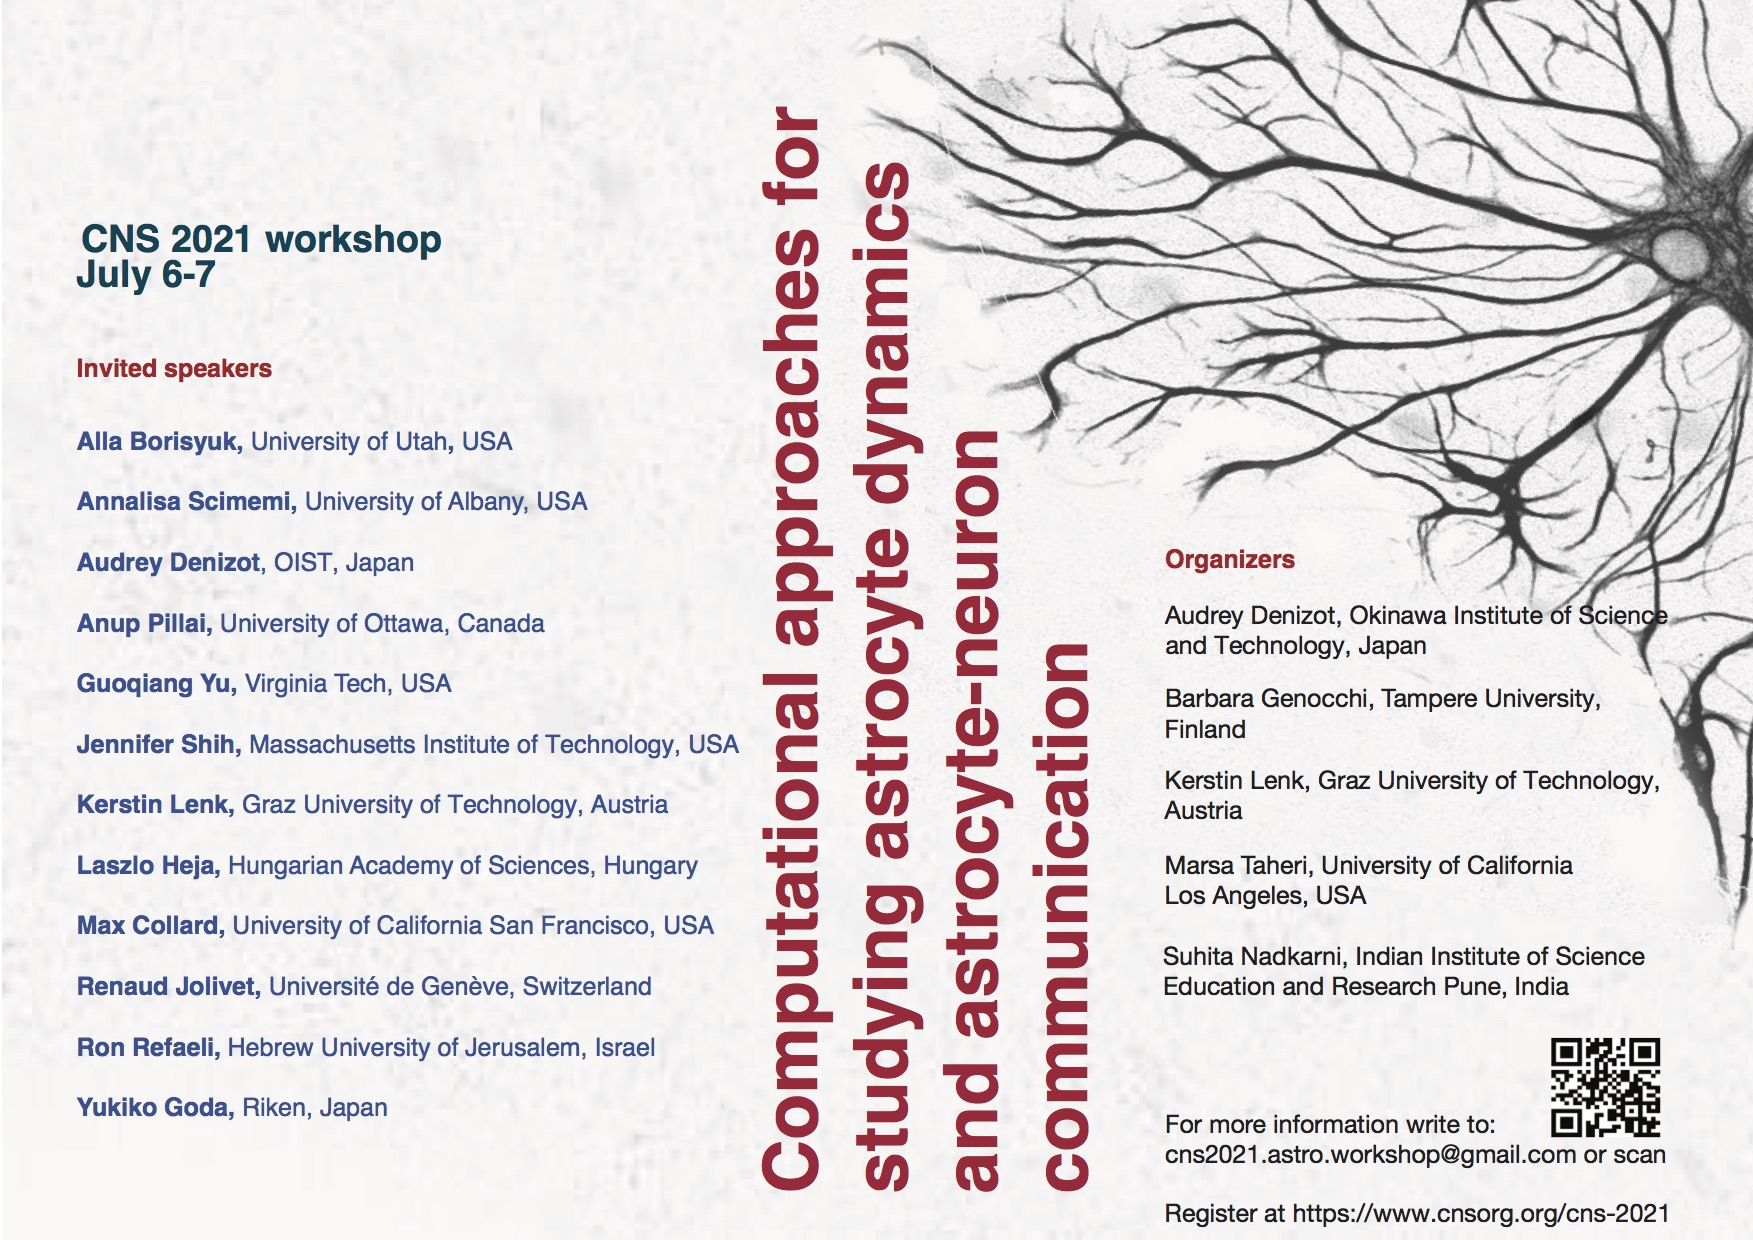 Poster of the CNS 2021 workshop